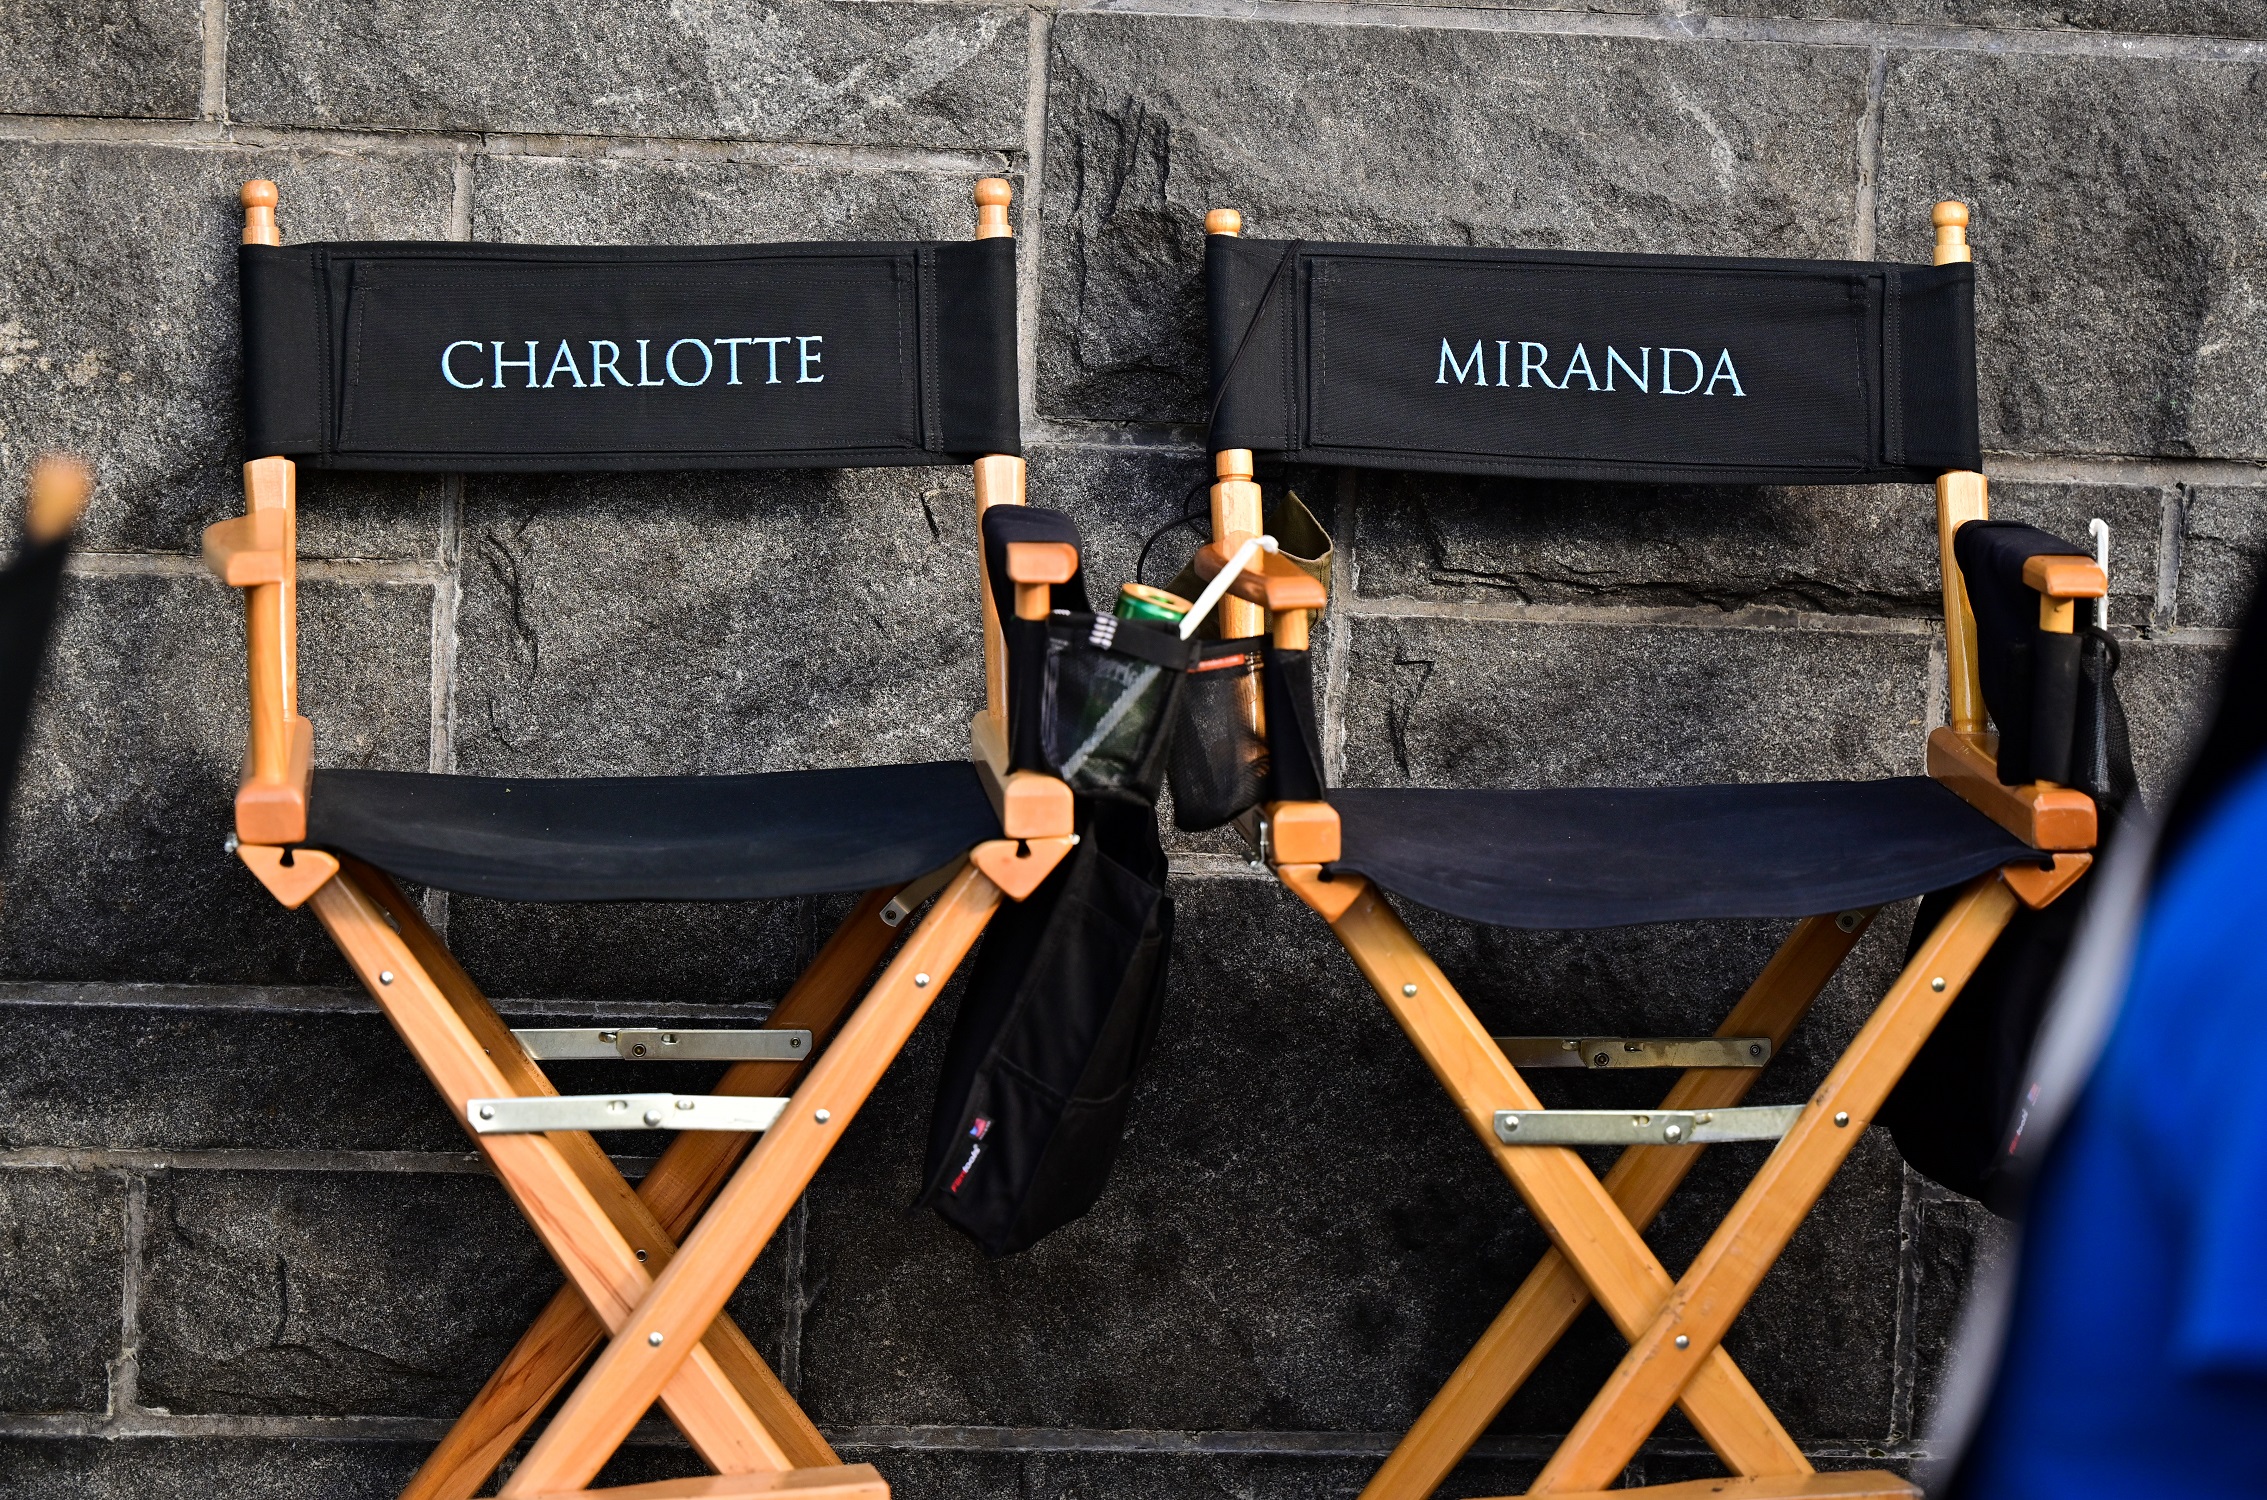 Director's chairs for 'And Just Like That...' are scene on the set in September 2021